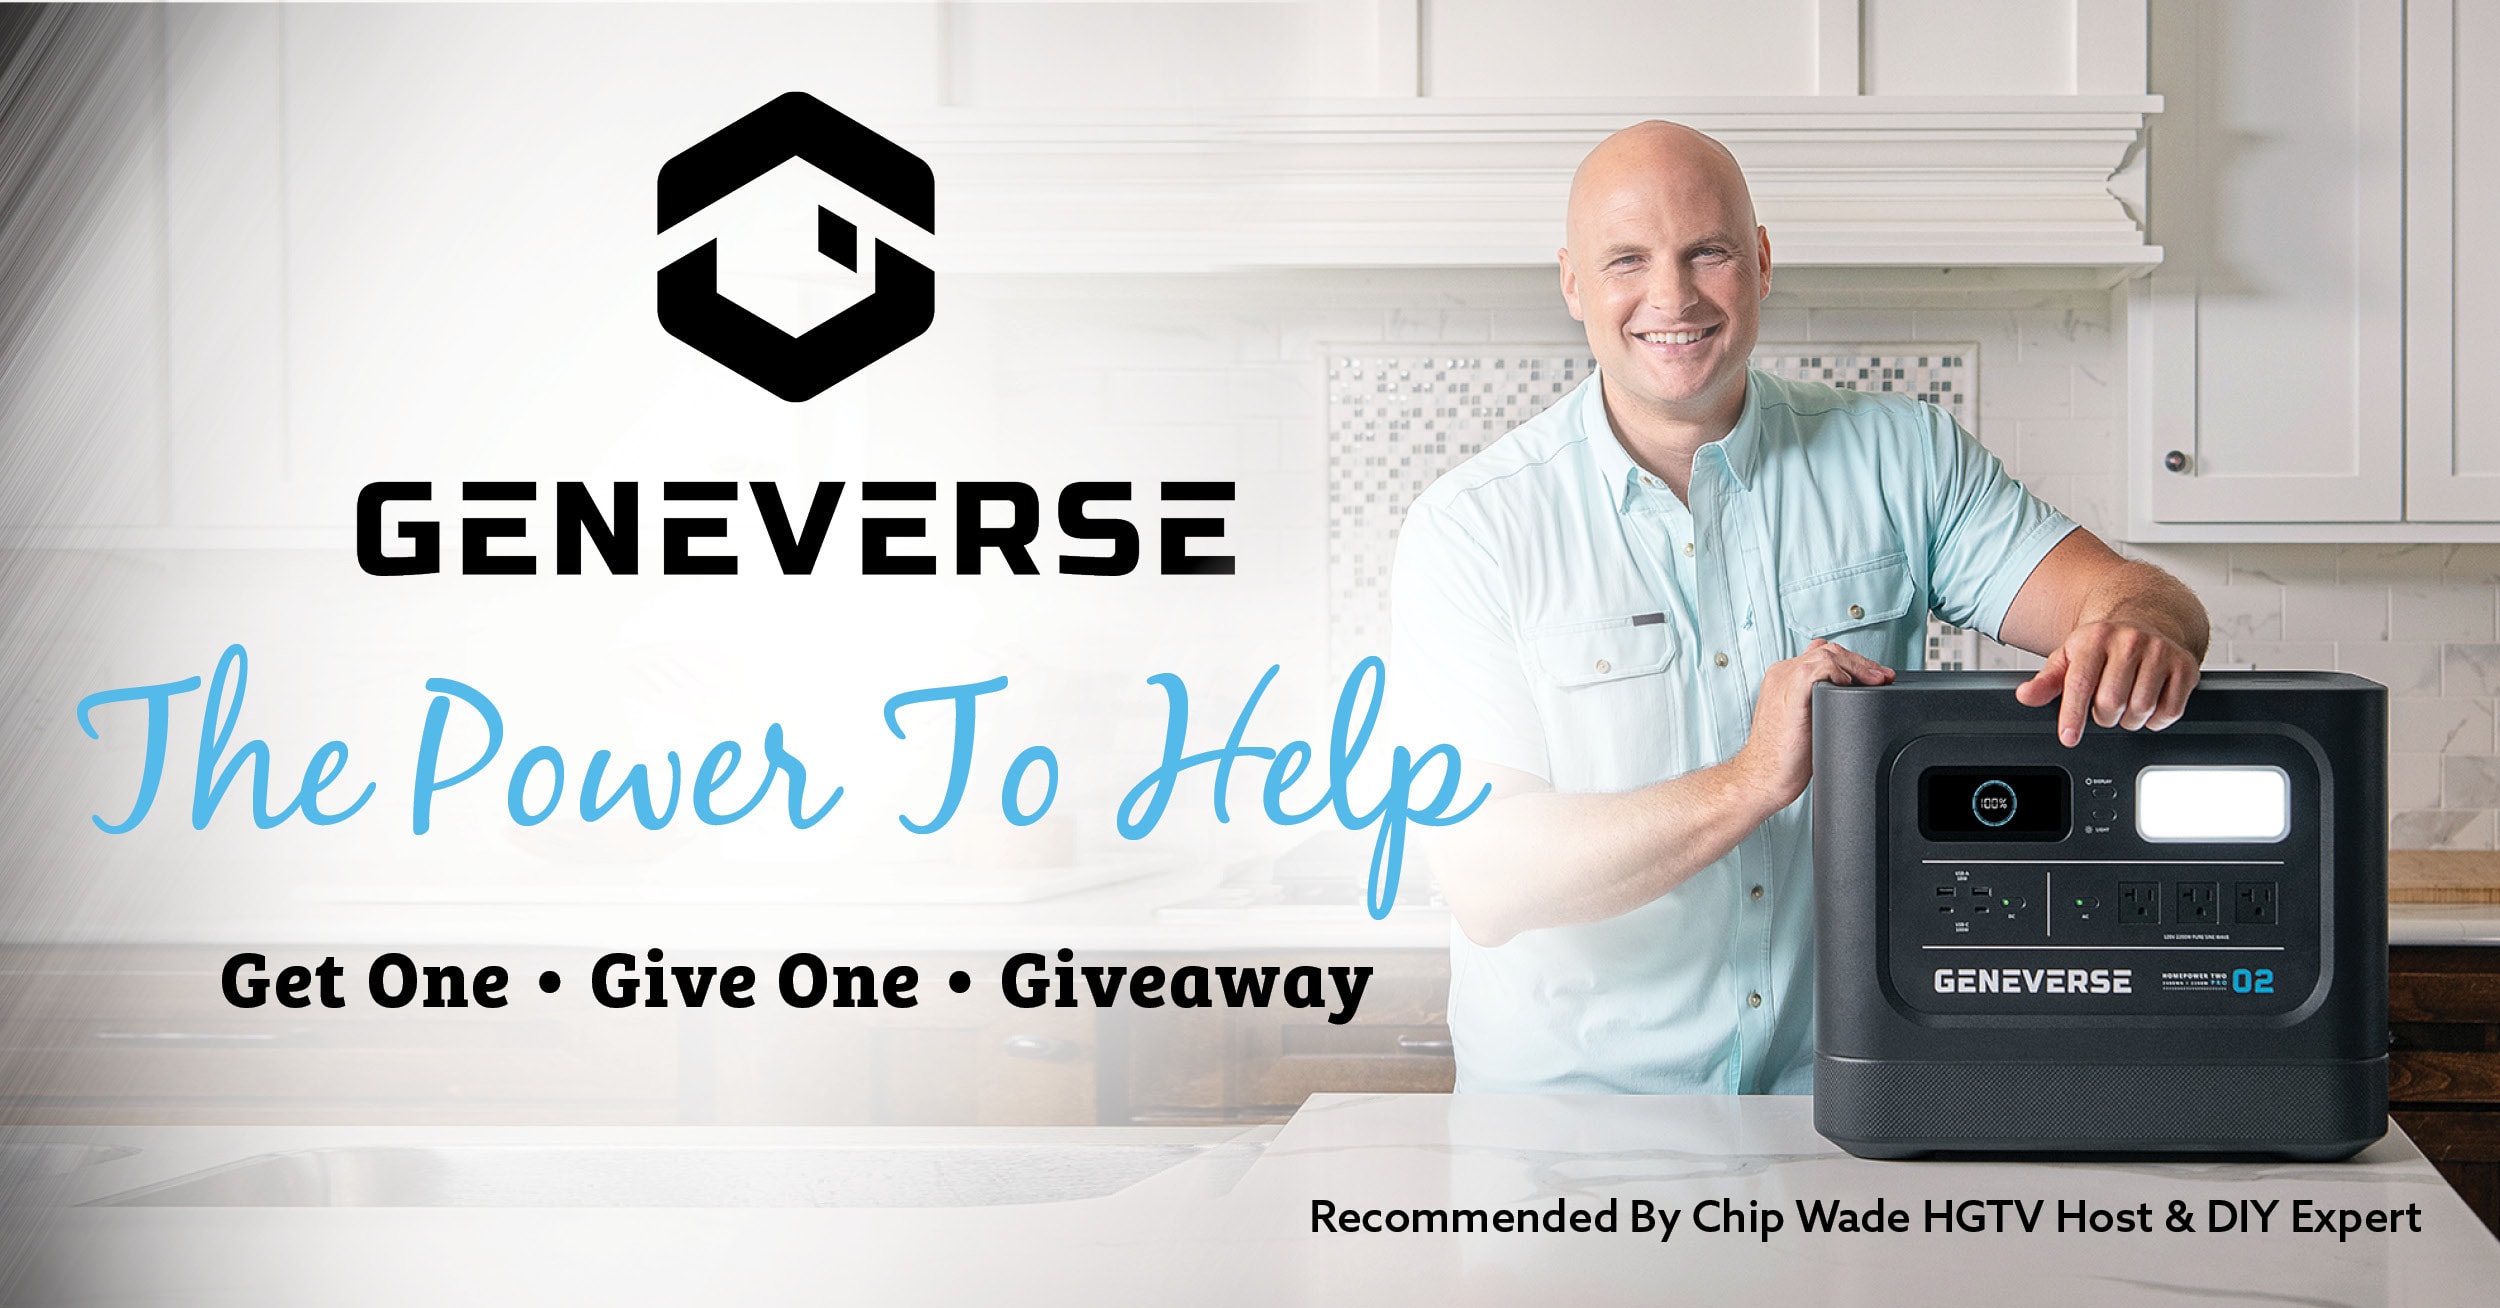 Geneverse Get One Give One Giveaway